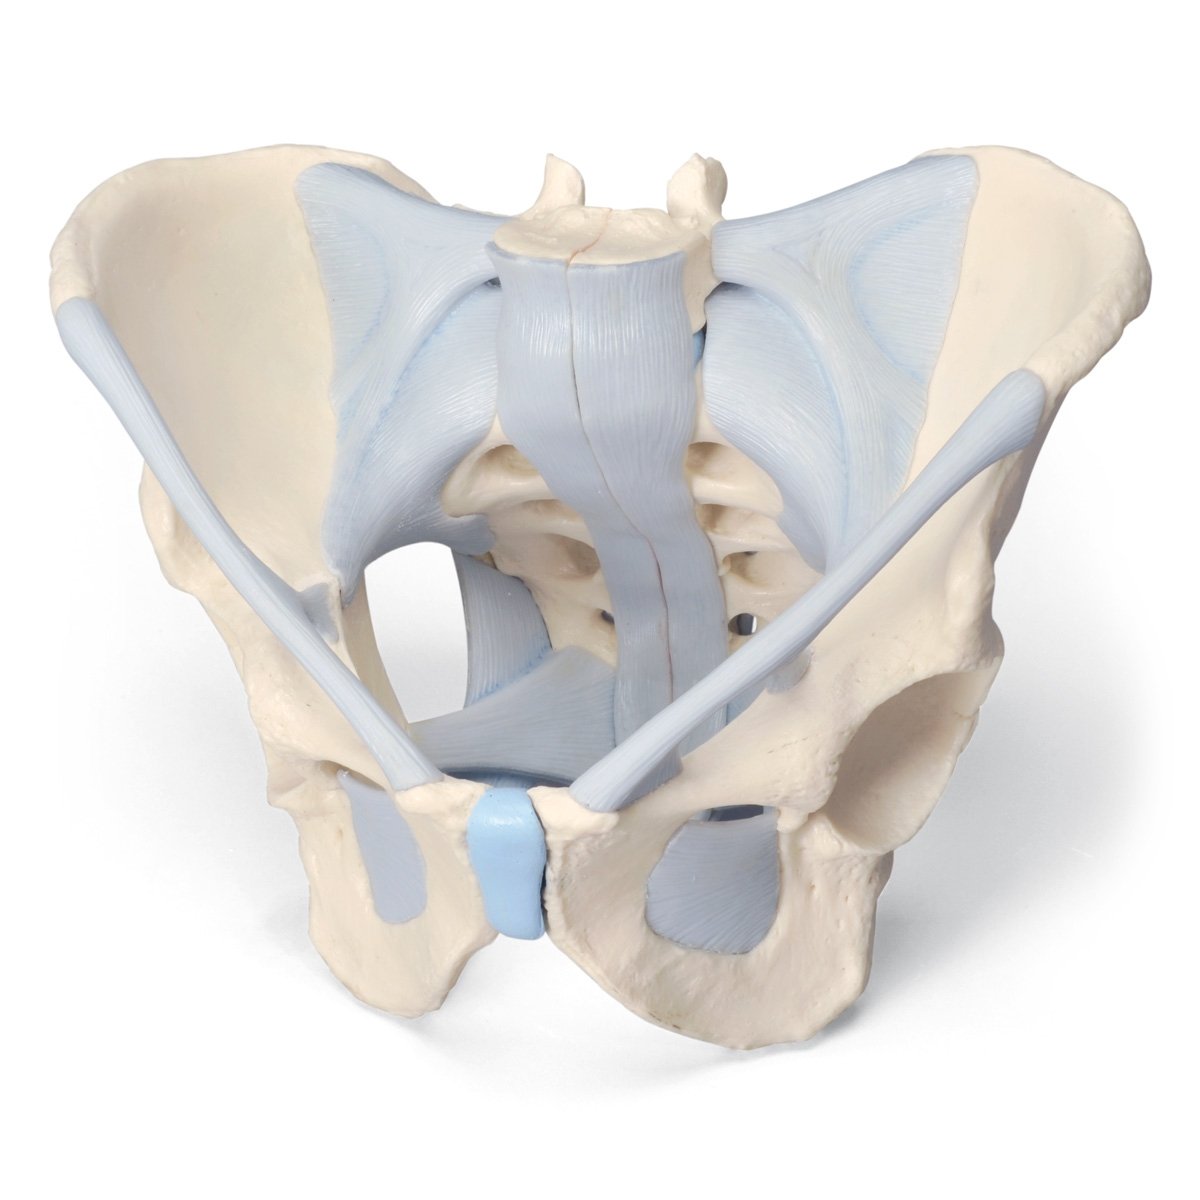 3B Scientific H21/2 Male pelvis with Ligaments (2 Parts)